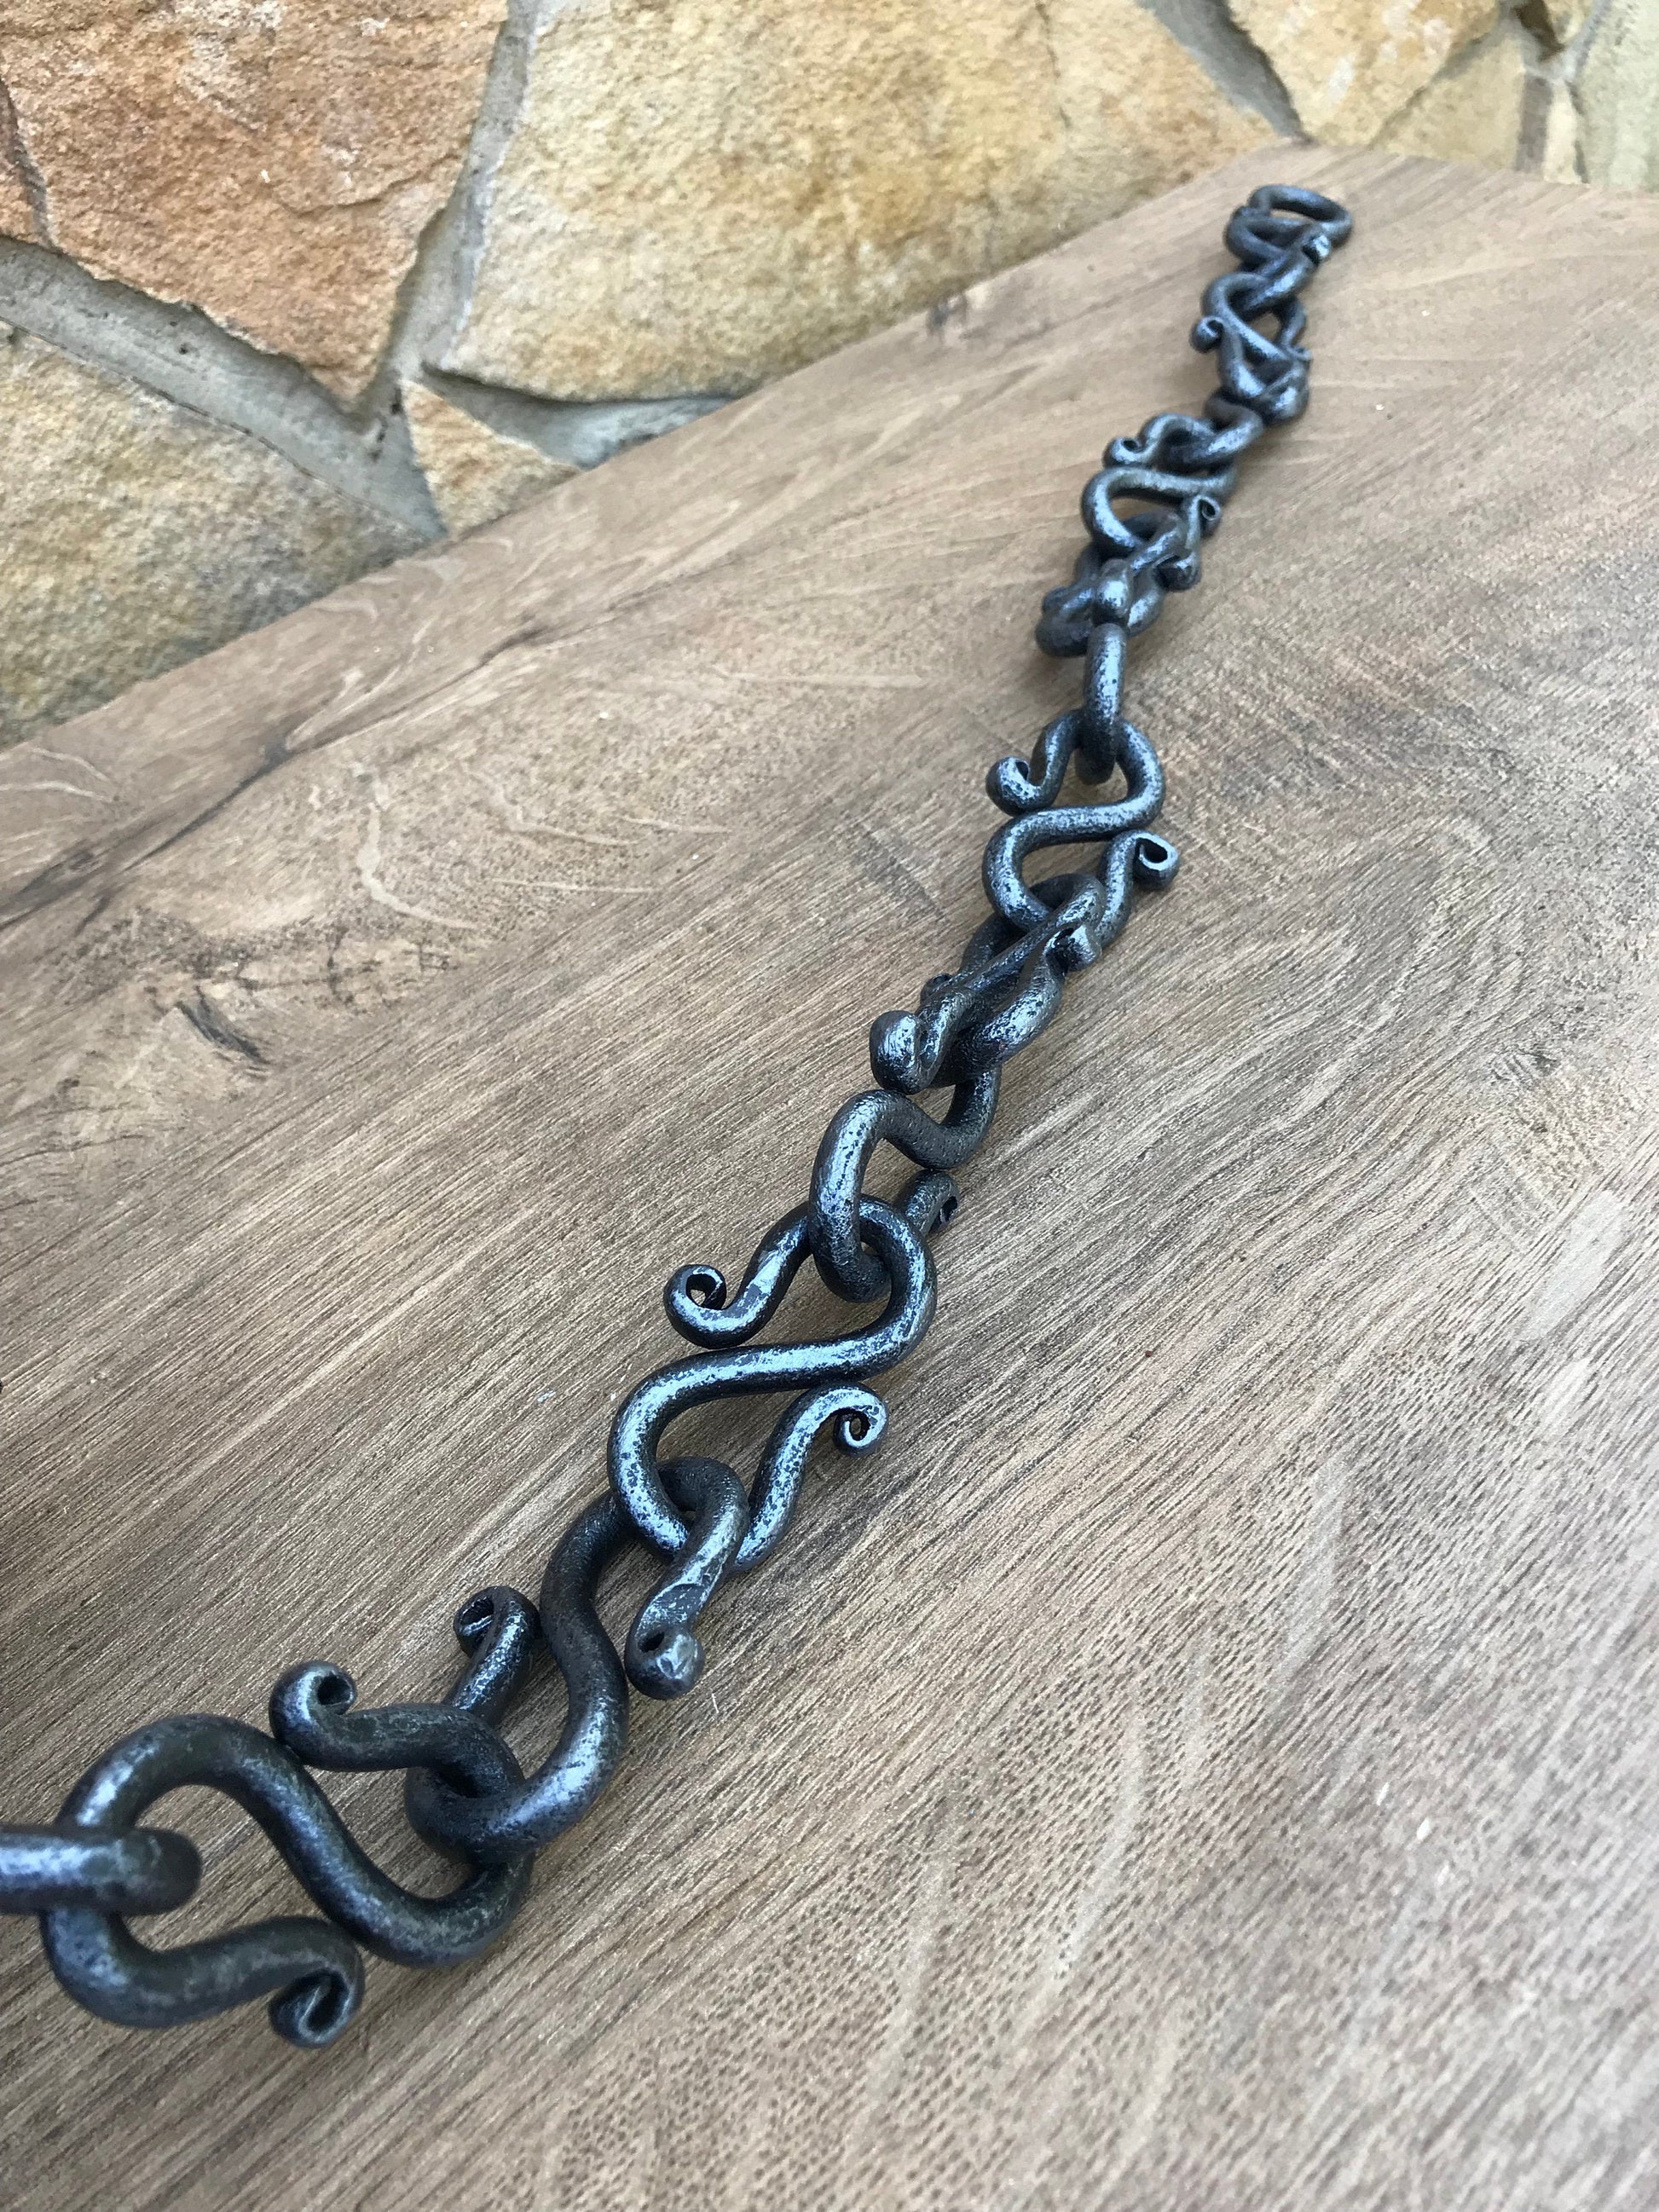 On Sale 61'' Long Hand Forged Chain Antique Metal Chain Vintage Iron Chain,  Antique Chain, Chain for Lamps, Industrial decor FREE DELIVERY